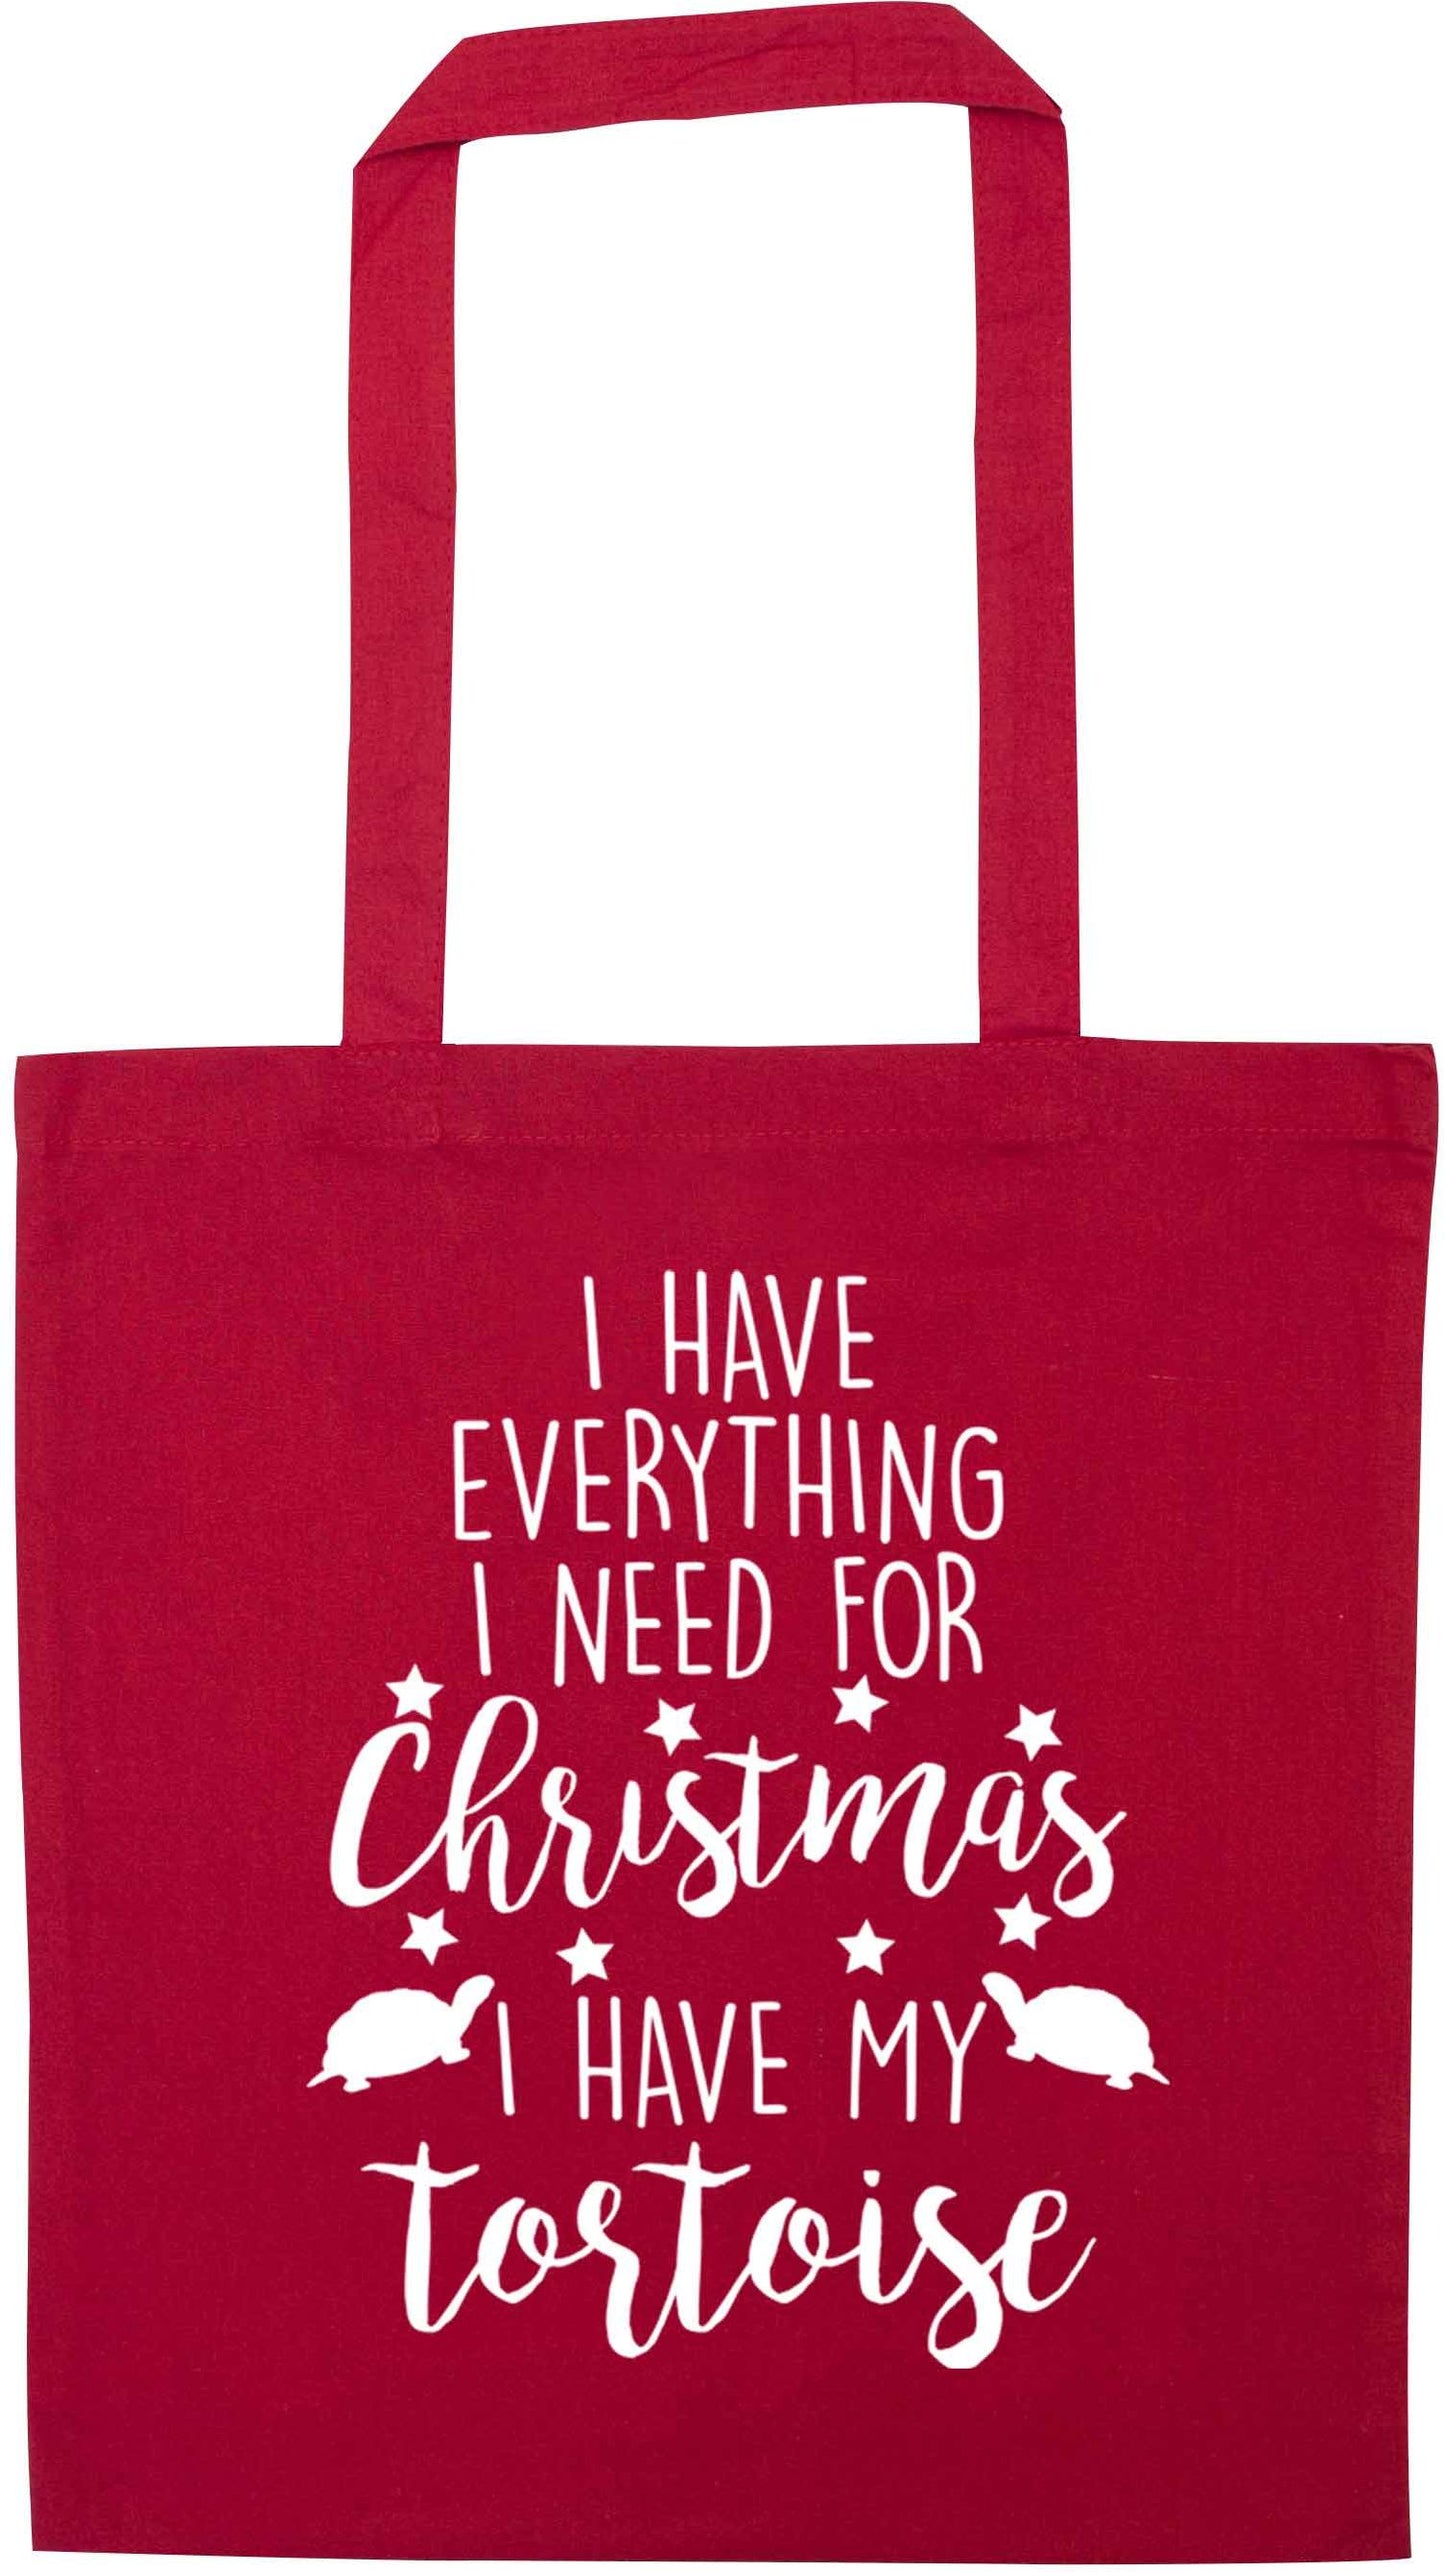 I have everything I need for Christmas I have my tortoise red tote bag